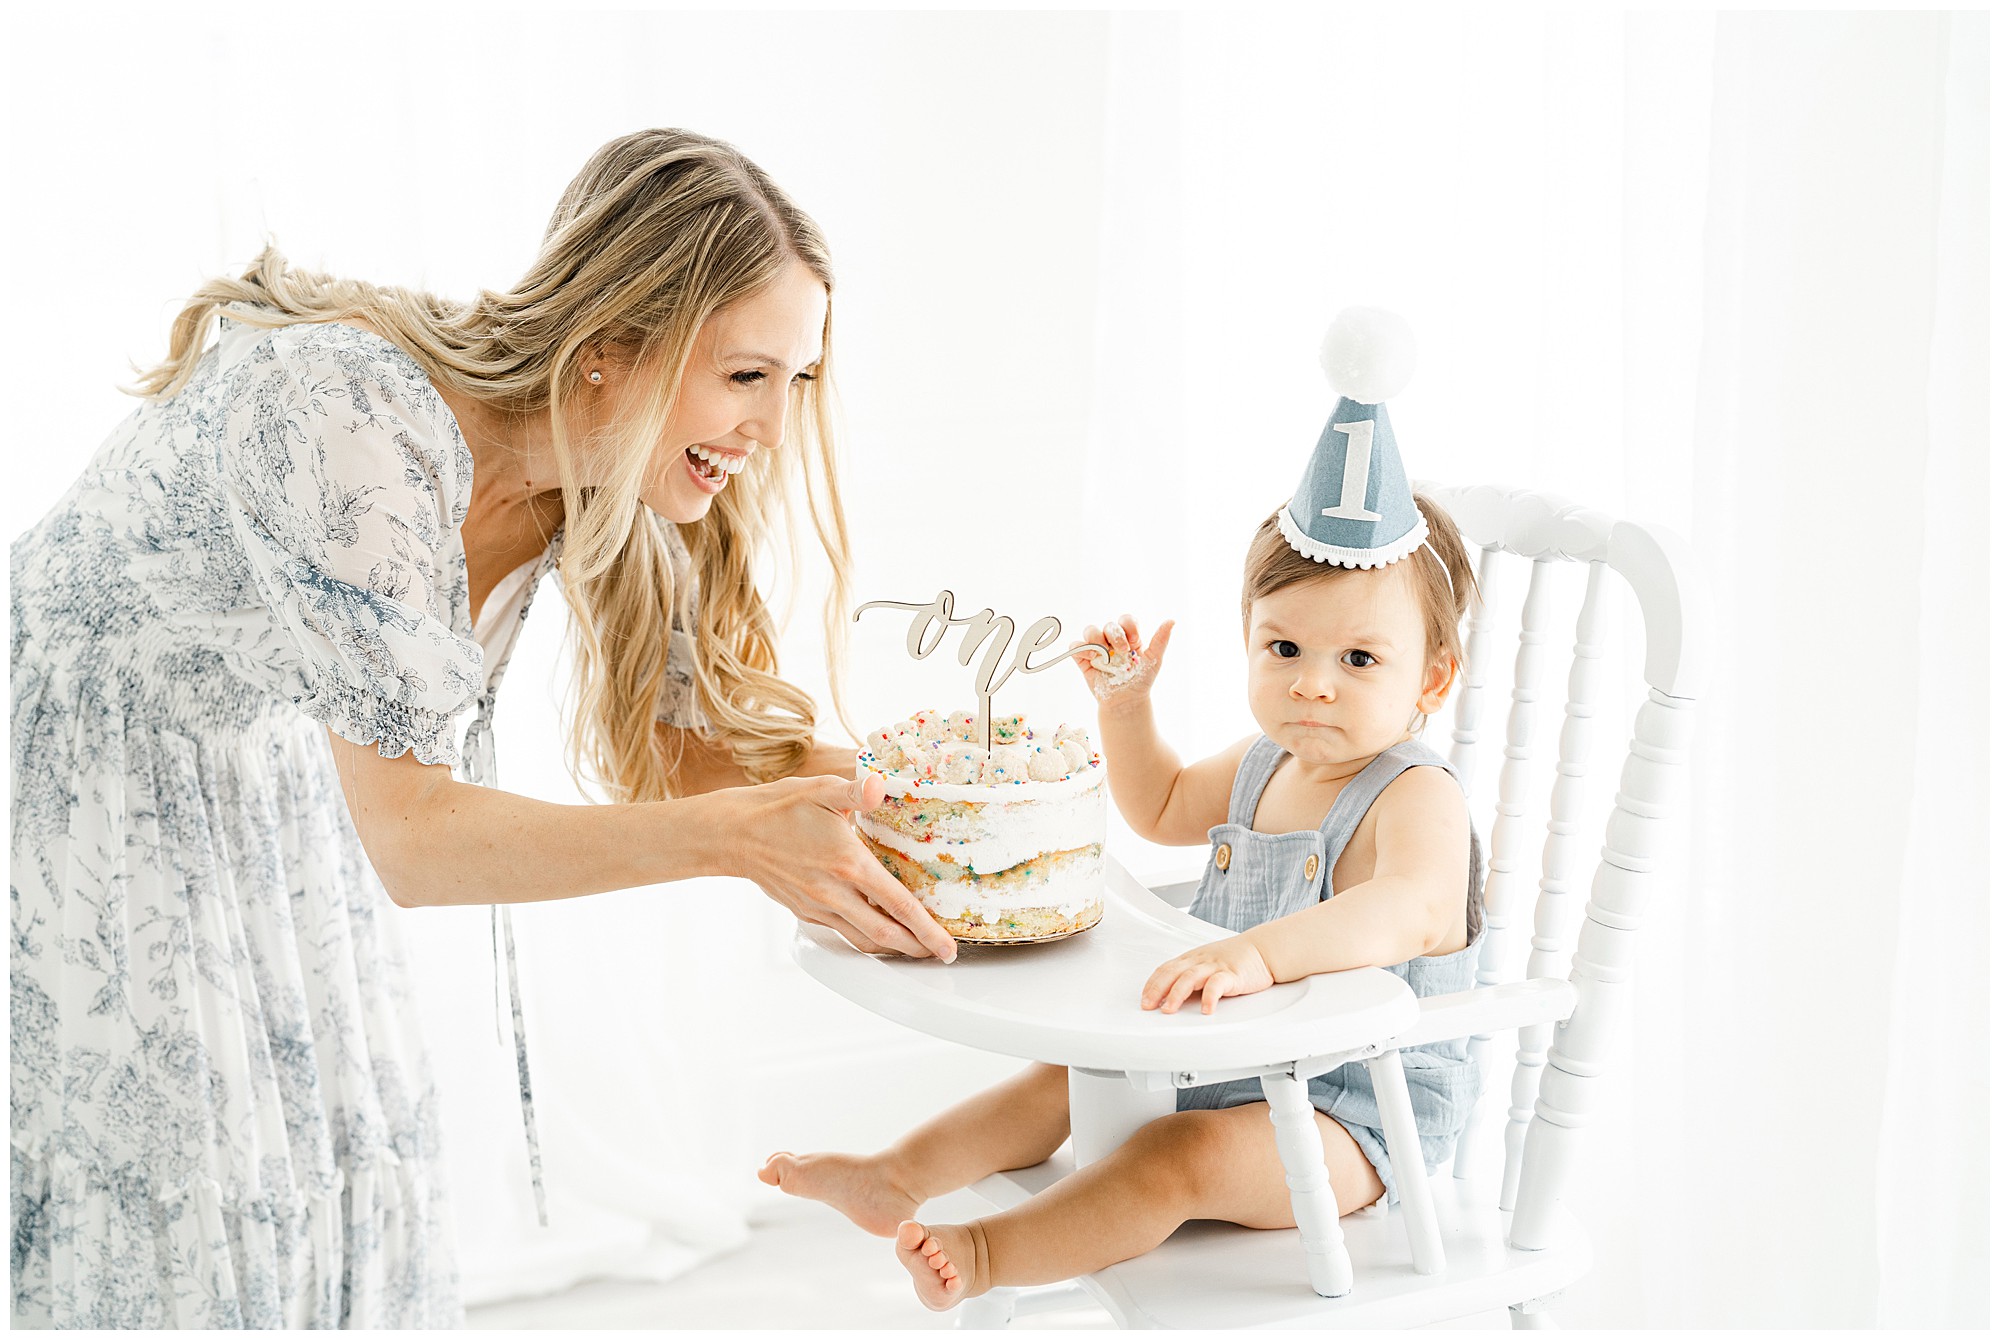 A mother present a first birthday cake to her baby seated in a high chair with a blue party hat on.